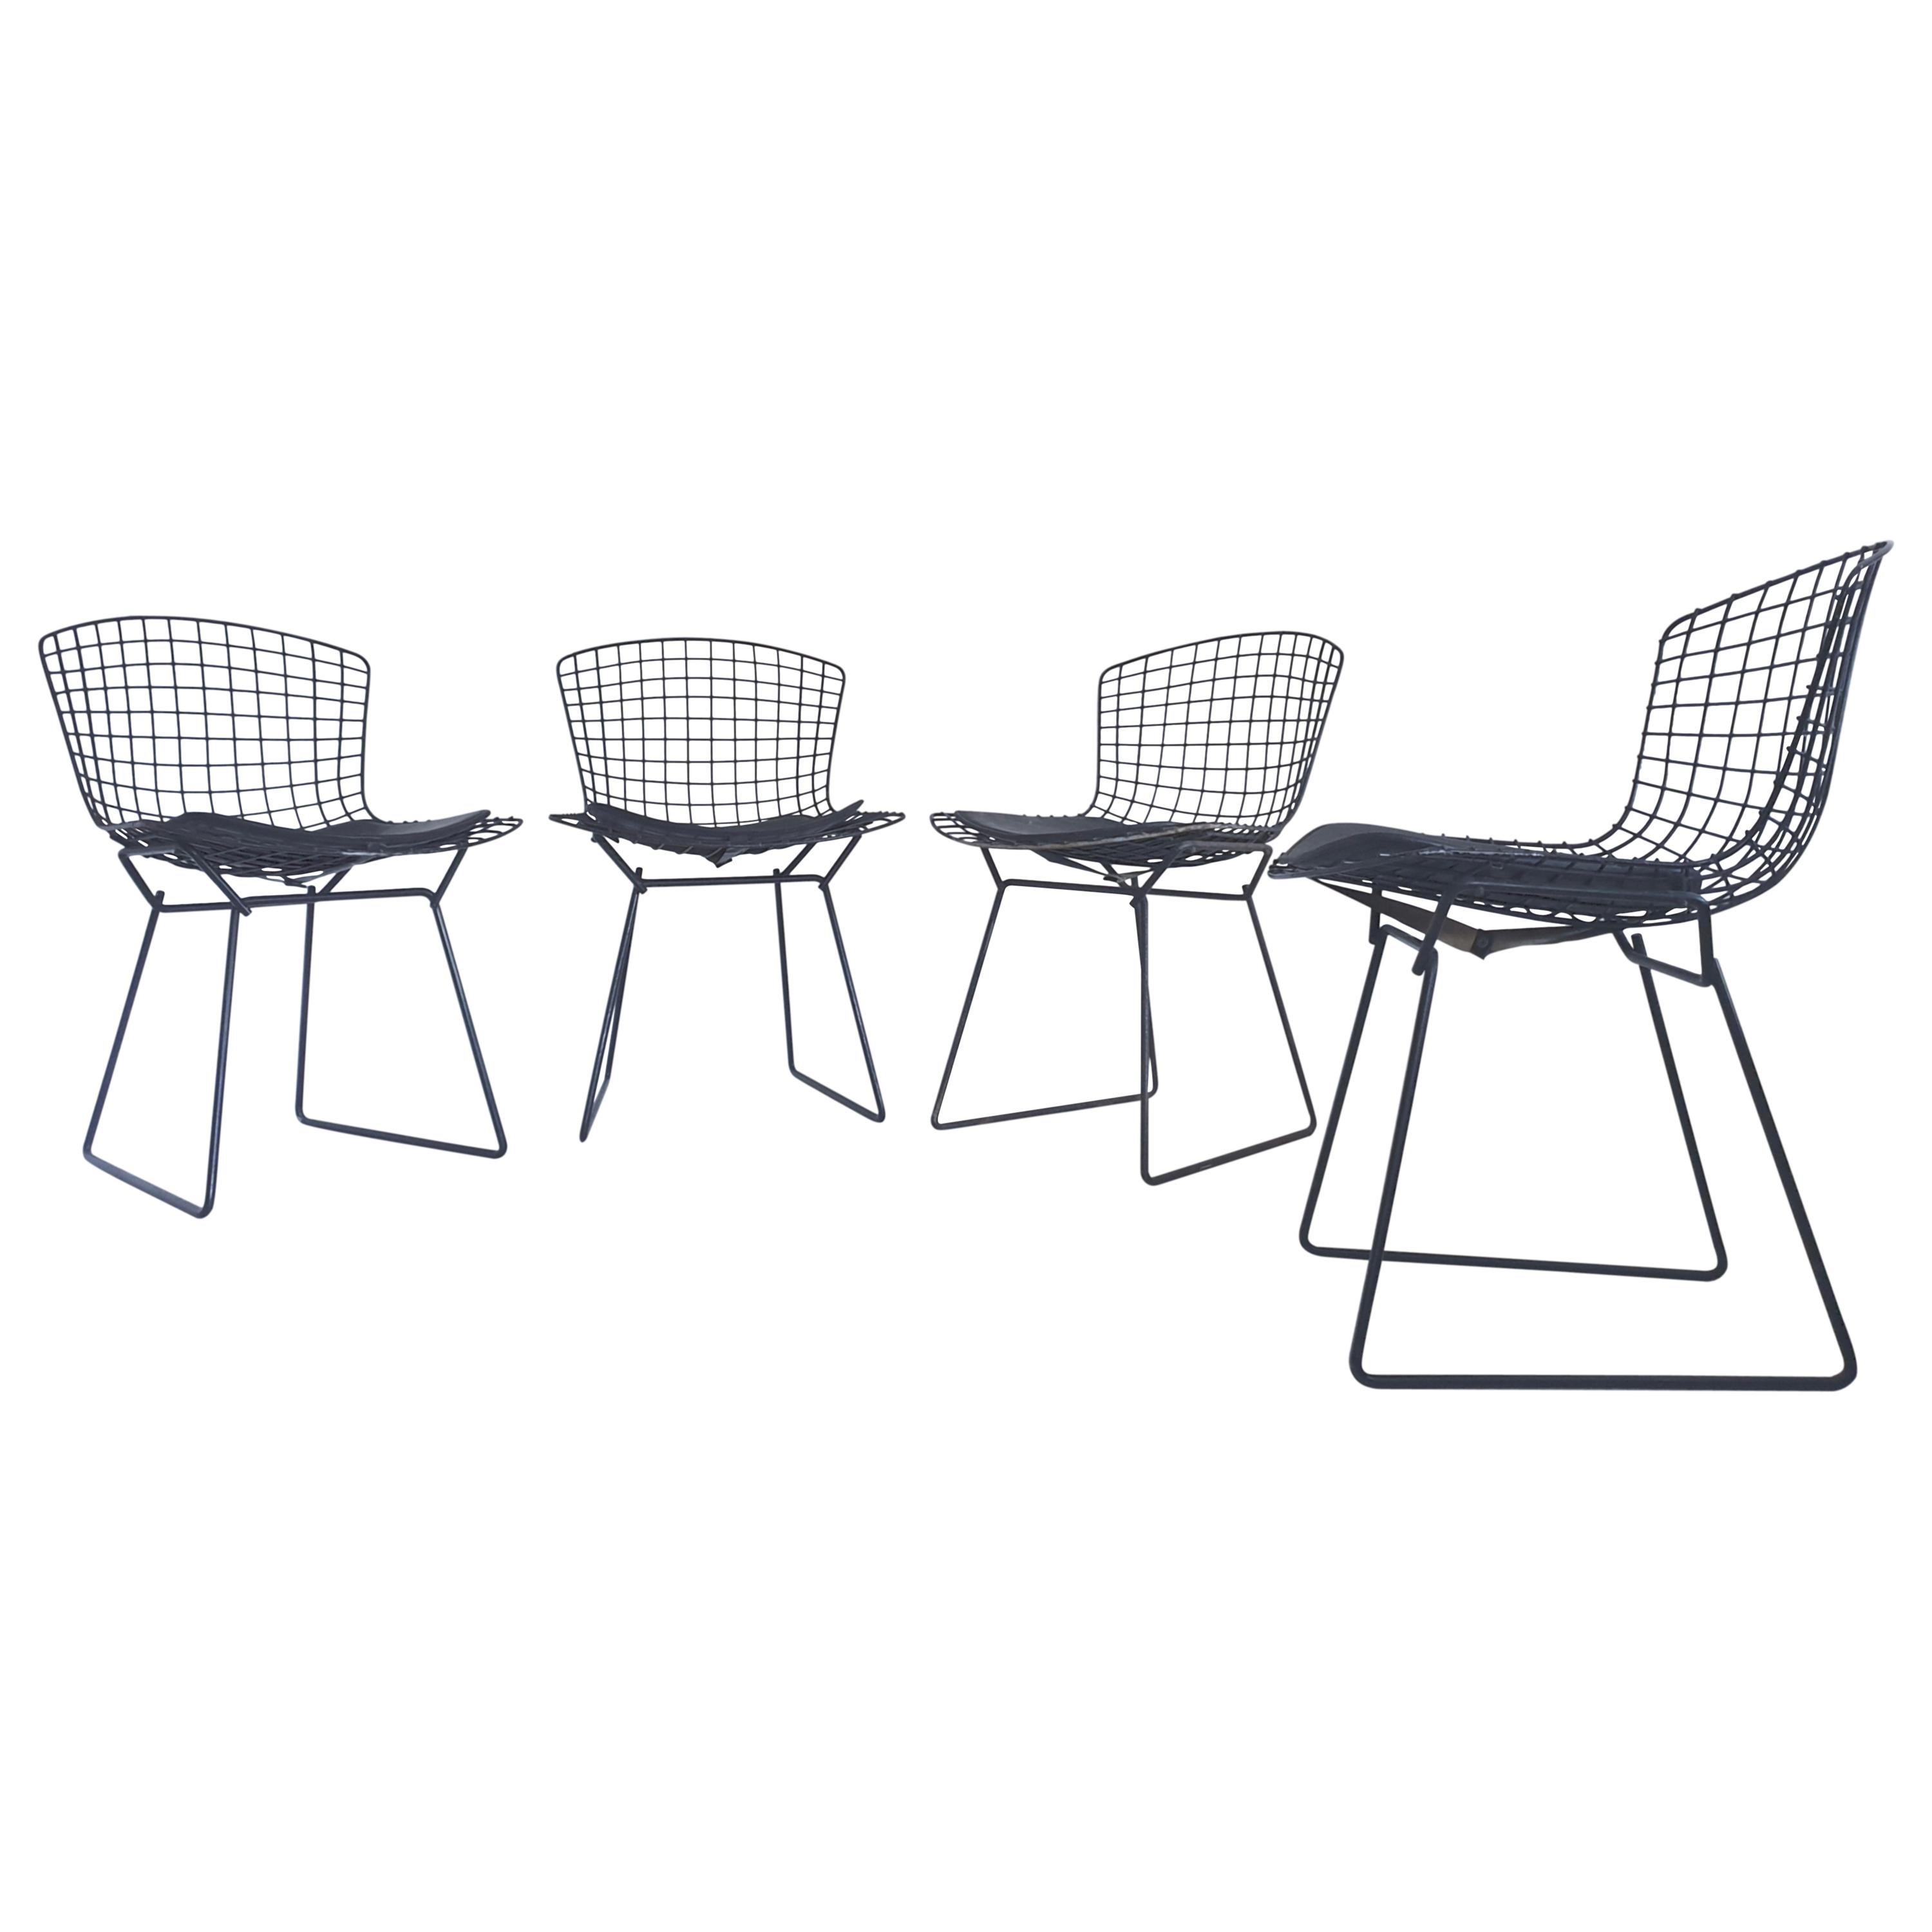 4 Early Production Midcentury Black Bertoia Side Chairs by Knoll, circa 1960